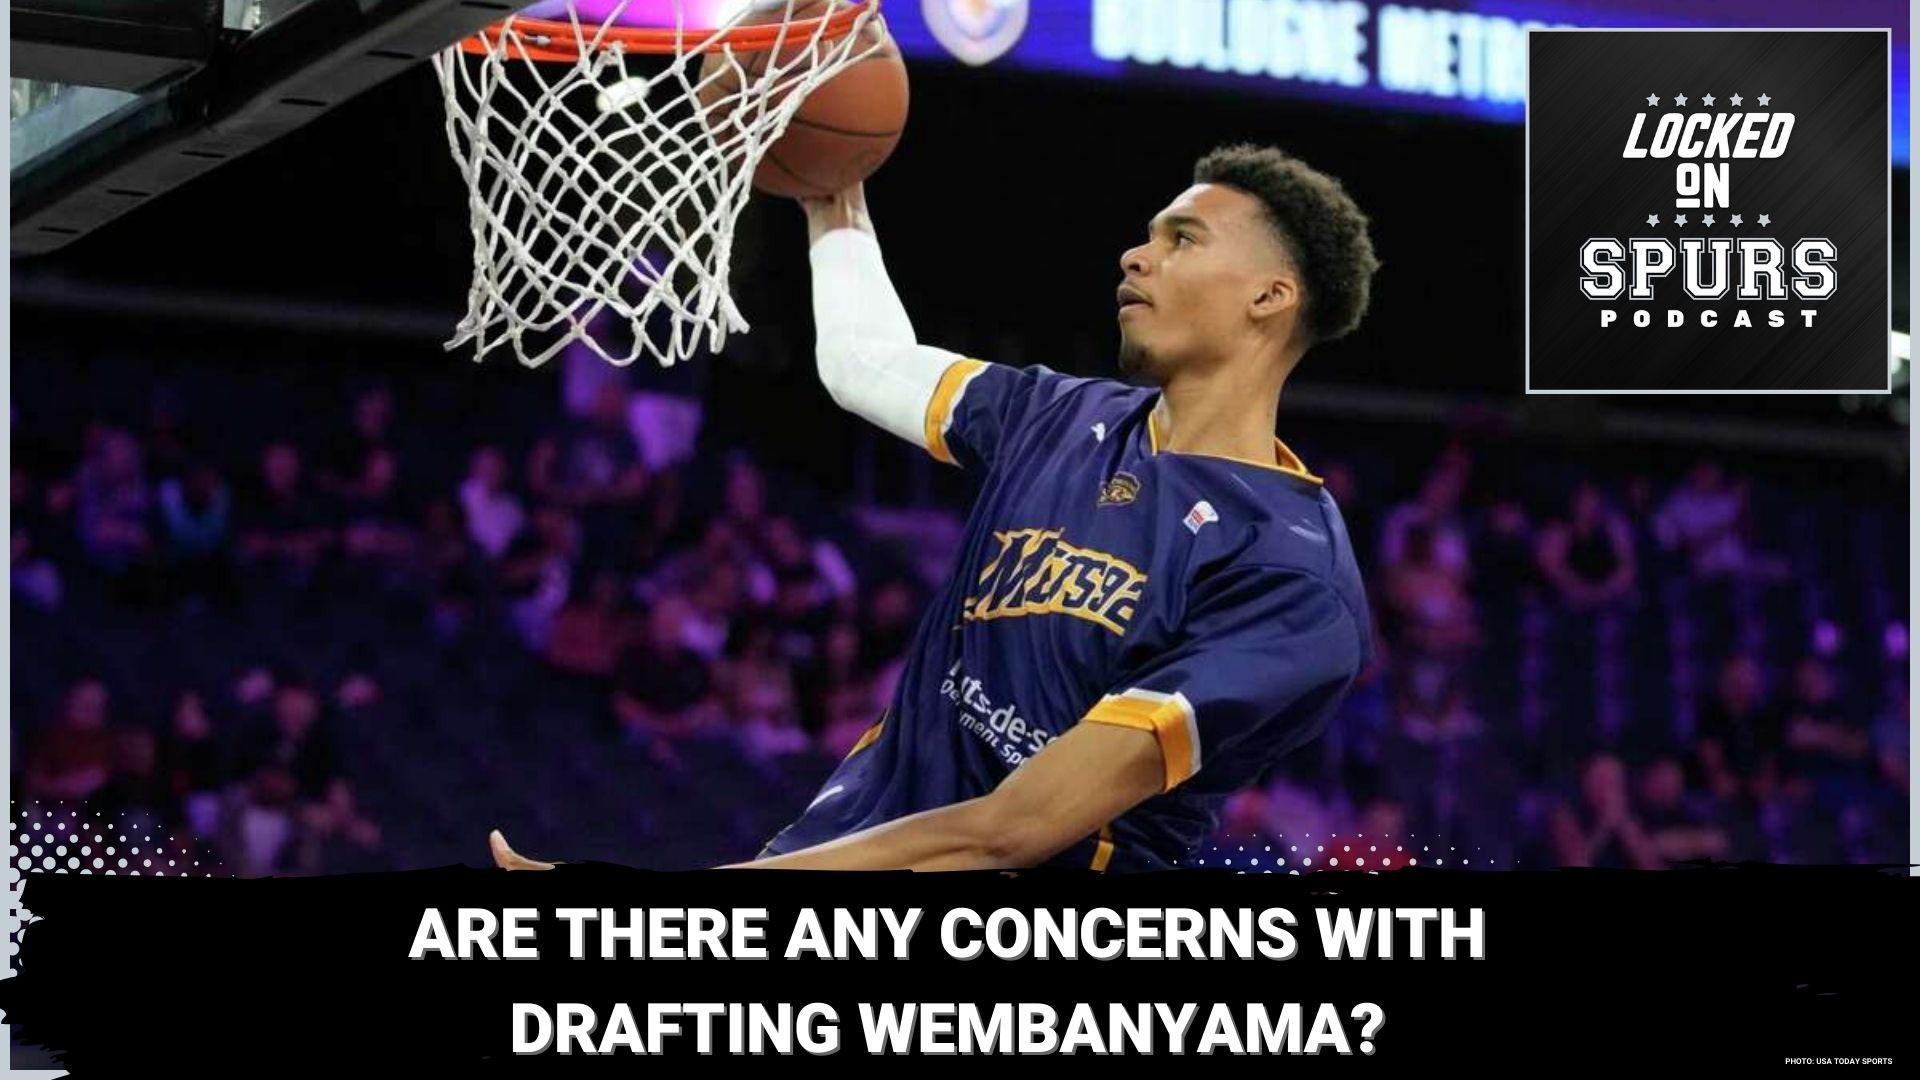 Here's some food for thought should the Spurs win the NBA Draft Lottery and select Wembanyama.